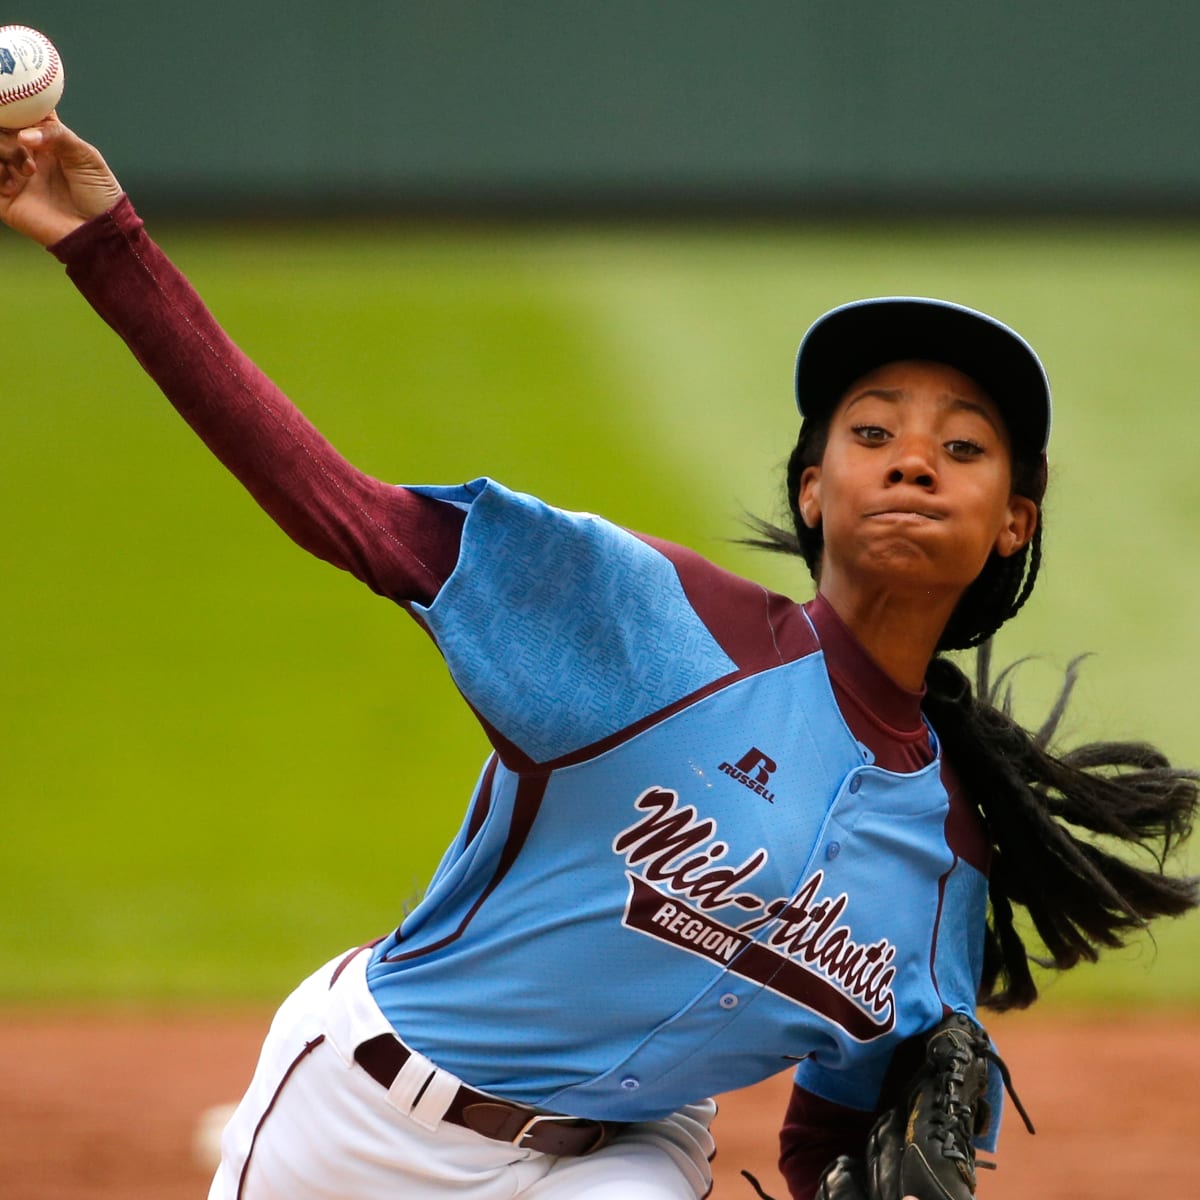 Mo'ne Davis: Is she great only by defeating boys?